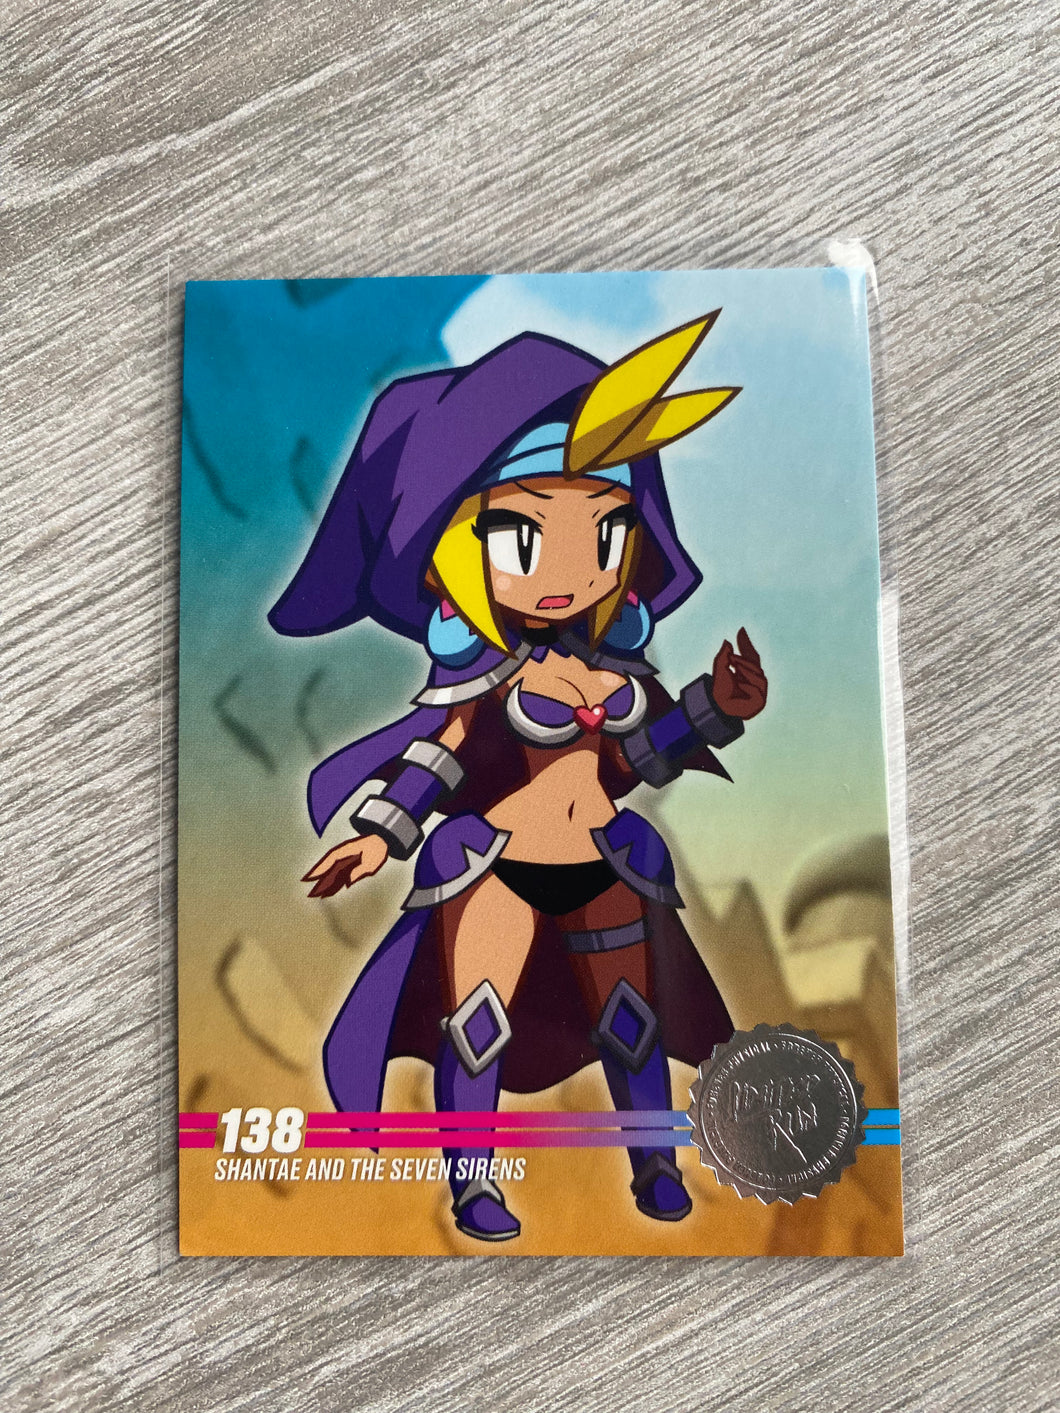 Gen3 #138 Silver Shantae and the seven sirens Limited run games trading card